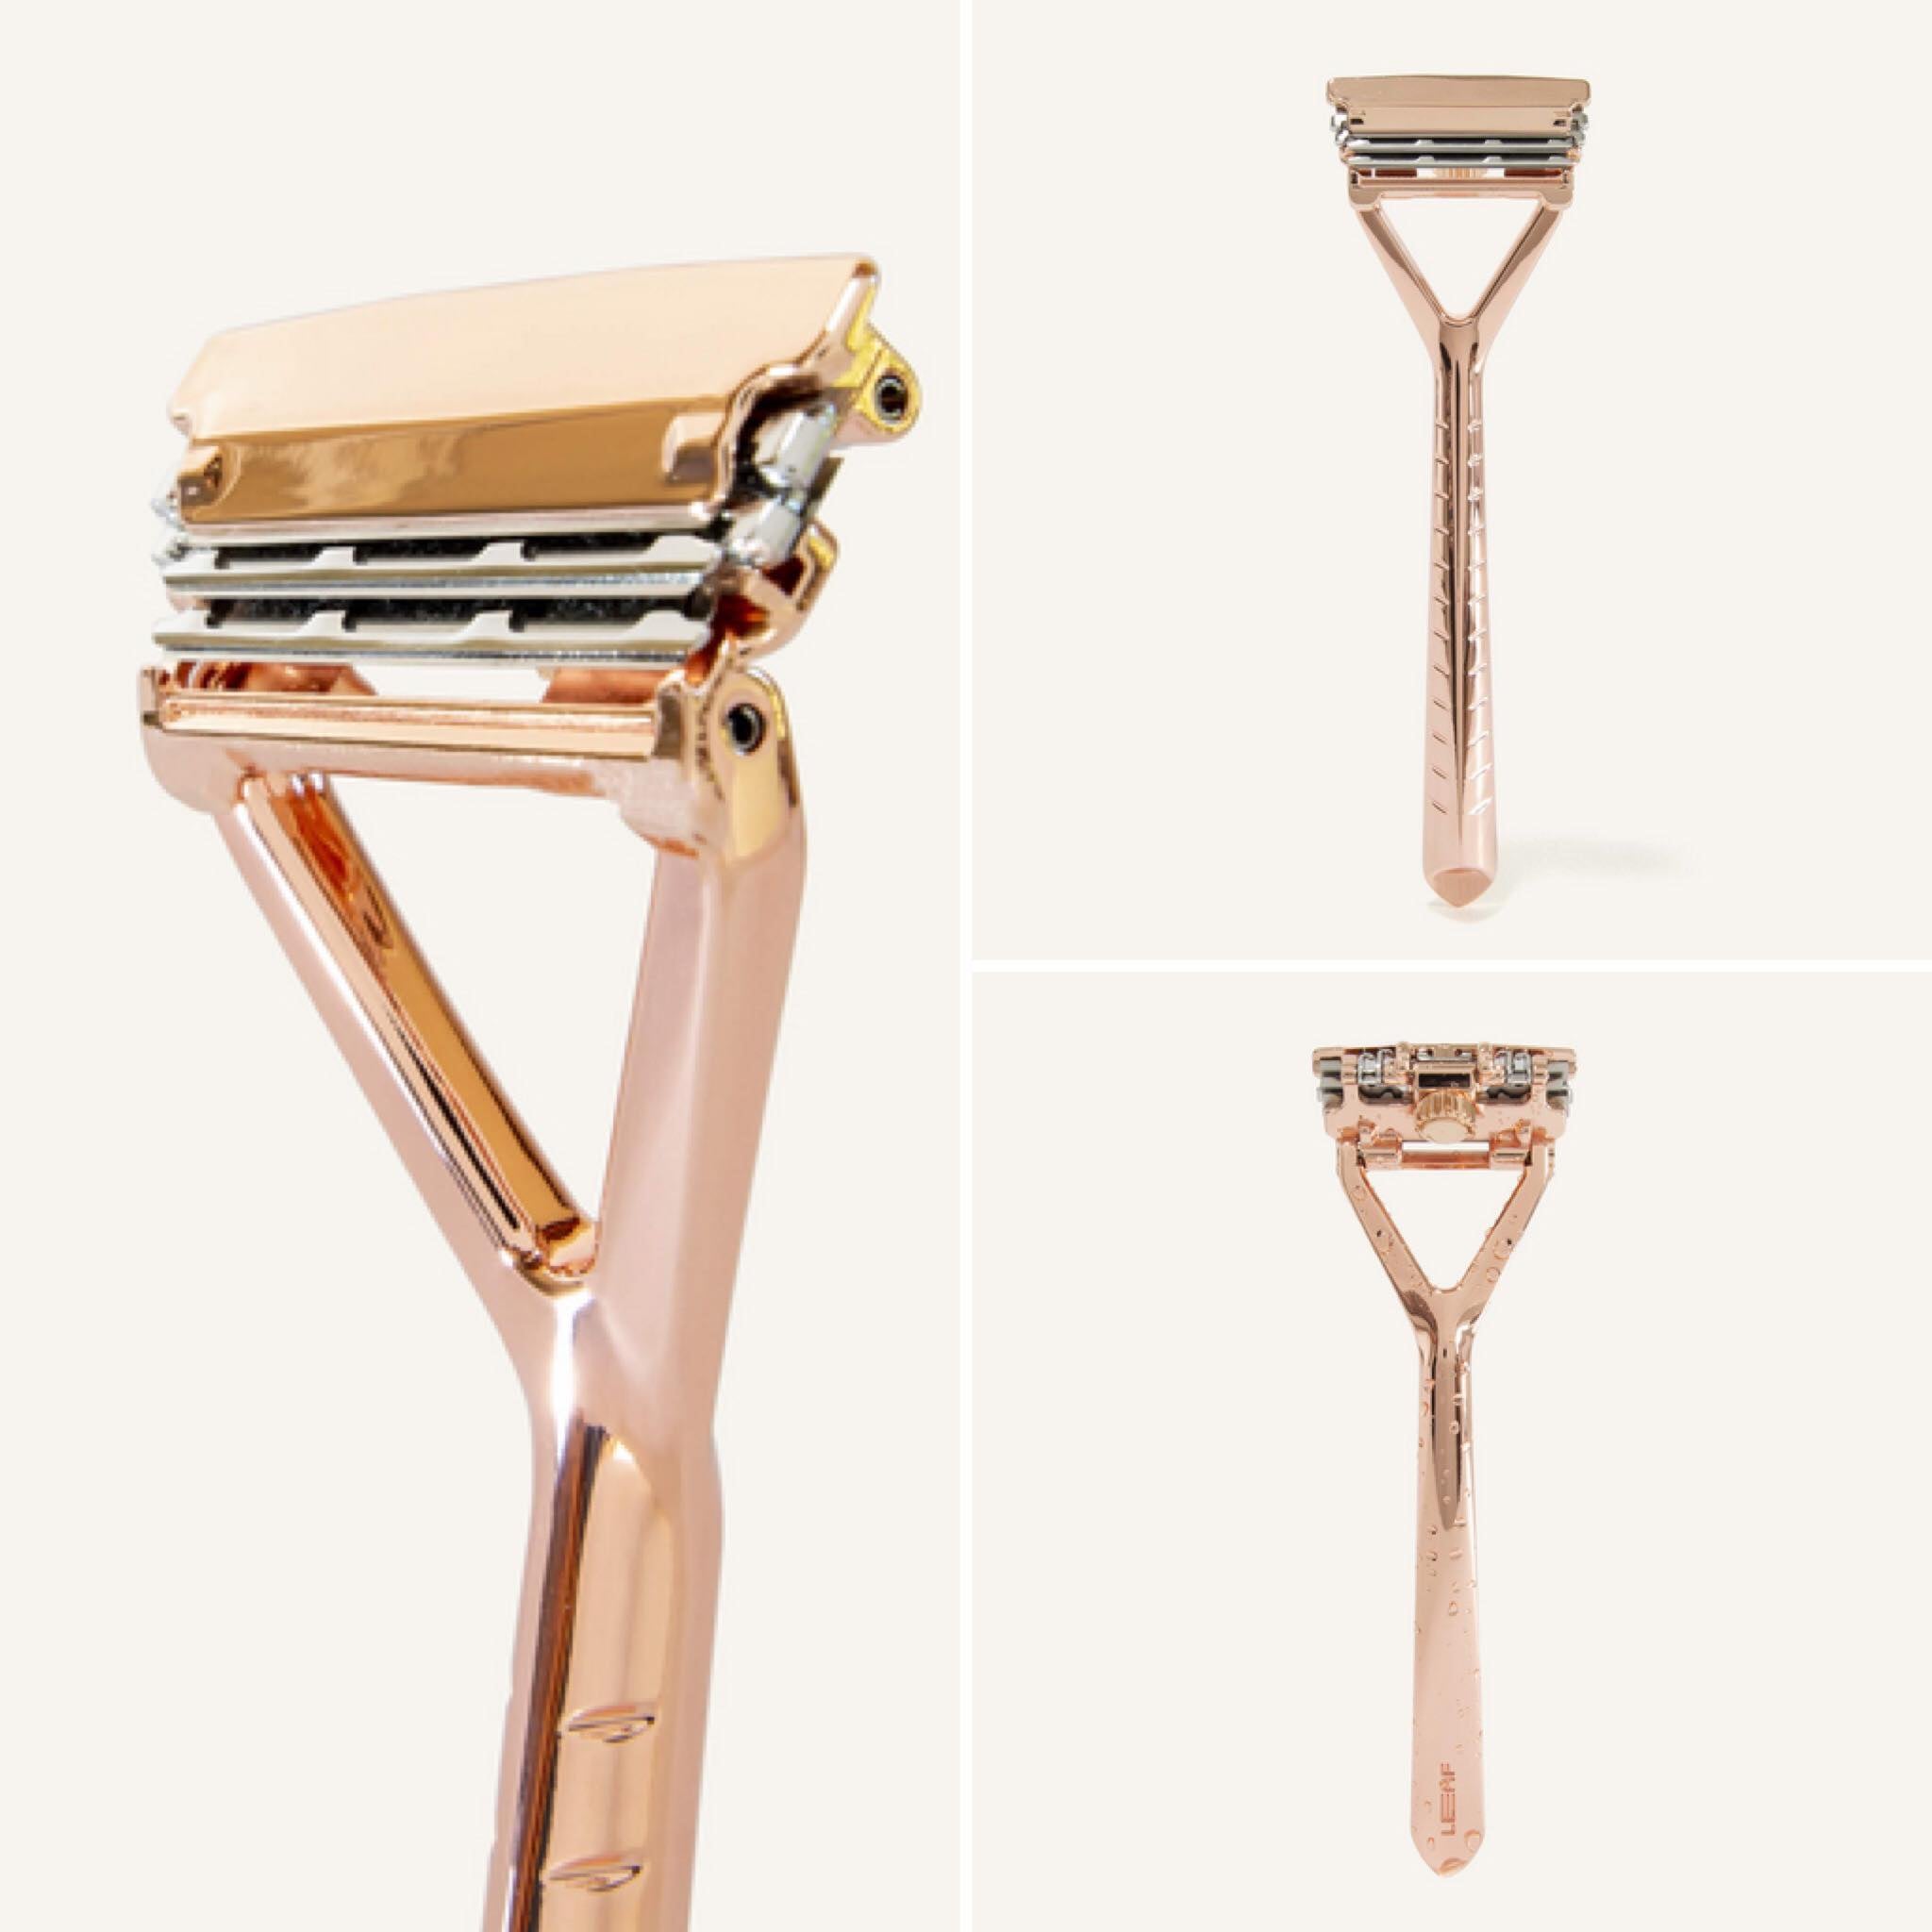 Leaf Razor with rose gold finish is a modern razor by Leaf Shave with a built-in pivoting heads and up to three blades for a better, more sustainable shave every time